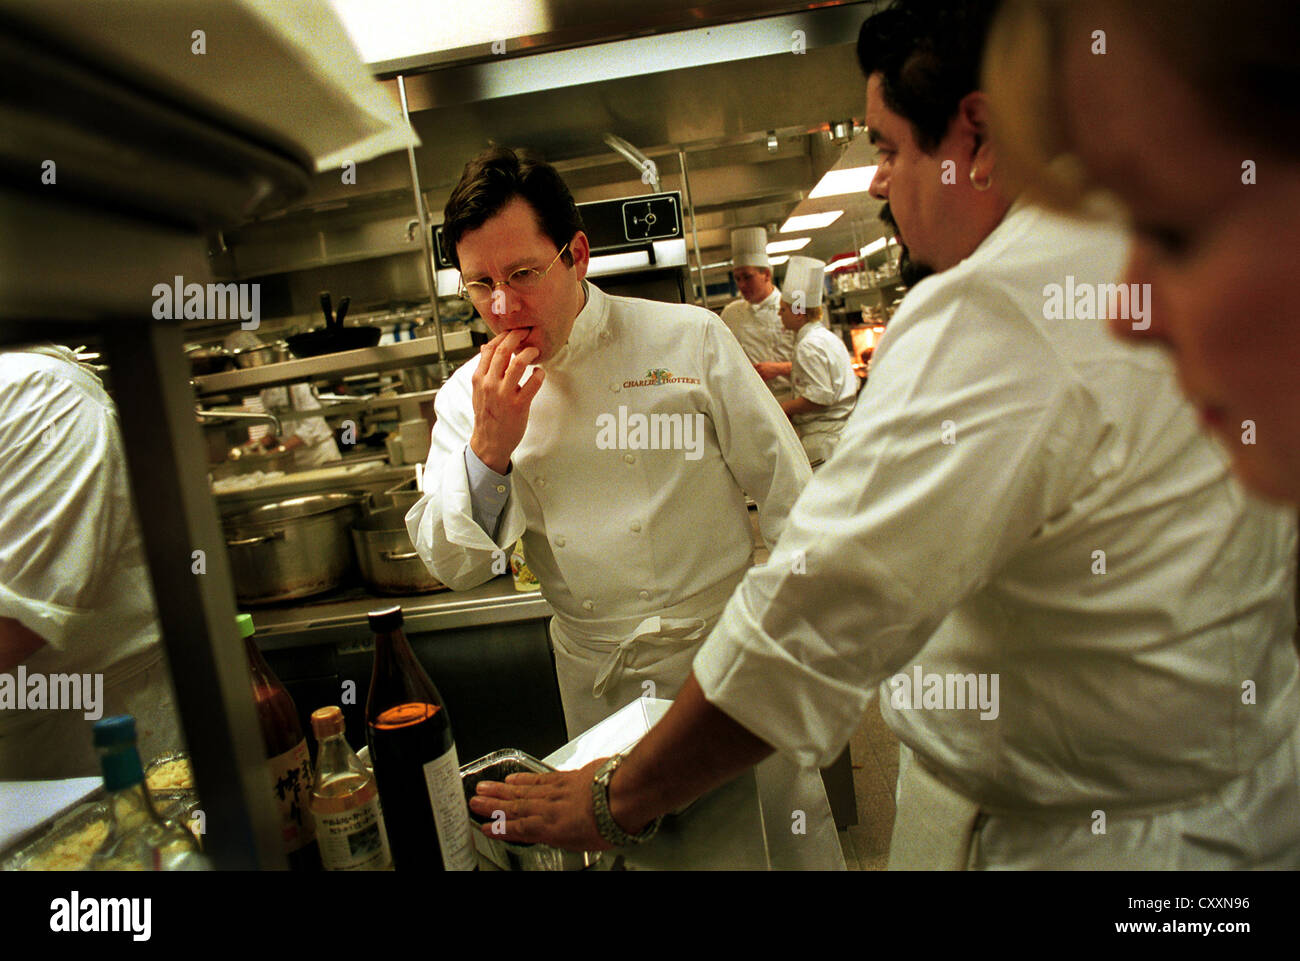 AMERICAN MASTERCHEF, CHARLIE TROTTER OF 'TROTTERS' IN CHICAGO GIVES A MASTERCLASS TO THE 'CHEFS CONFERENCE' Stock Photo